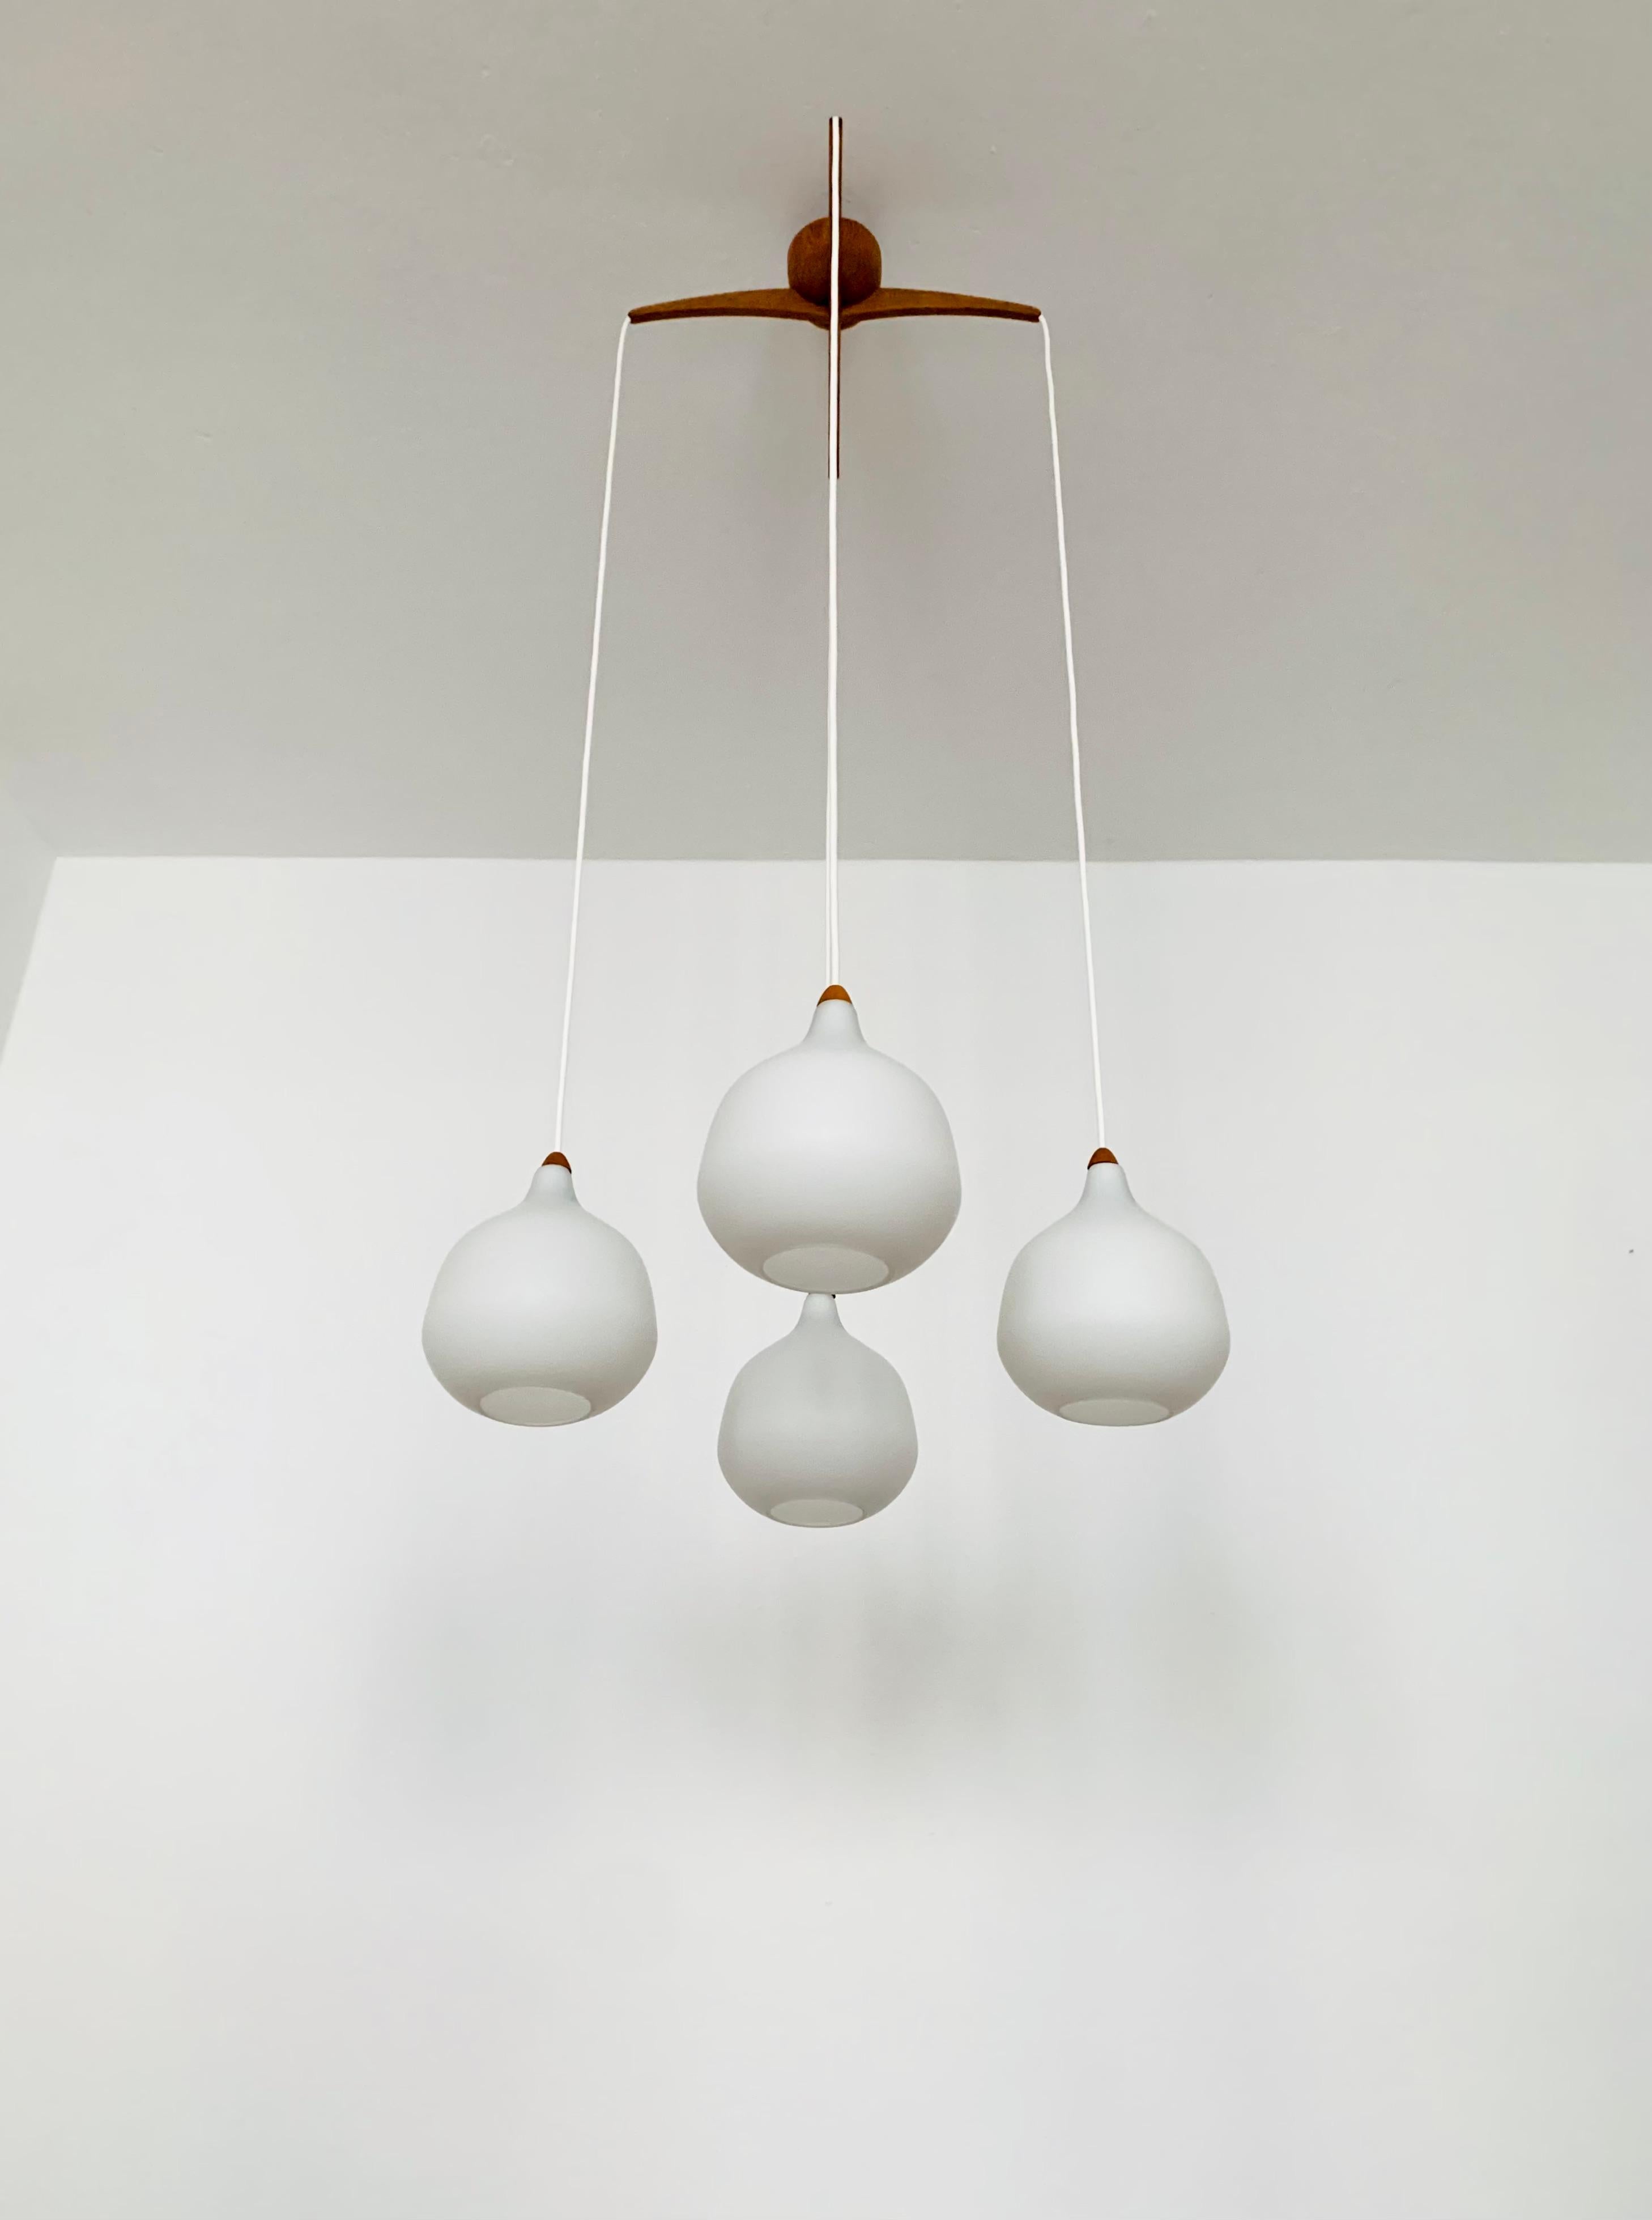 Wonderful Swedish opal glass pendant lamp from the 1960s.
Great and exceptionally minimalistic design with a fantastically elegant look.
Very nice oak wood details.

Manufacturer: Luxus
Design: Uno and Östen Kristiansson

Condition:

Very good